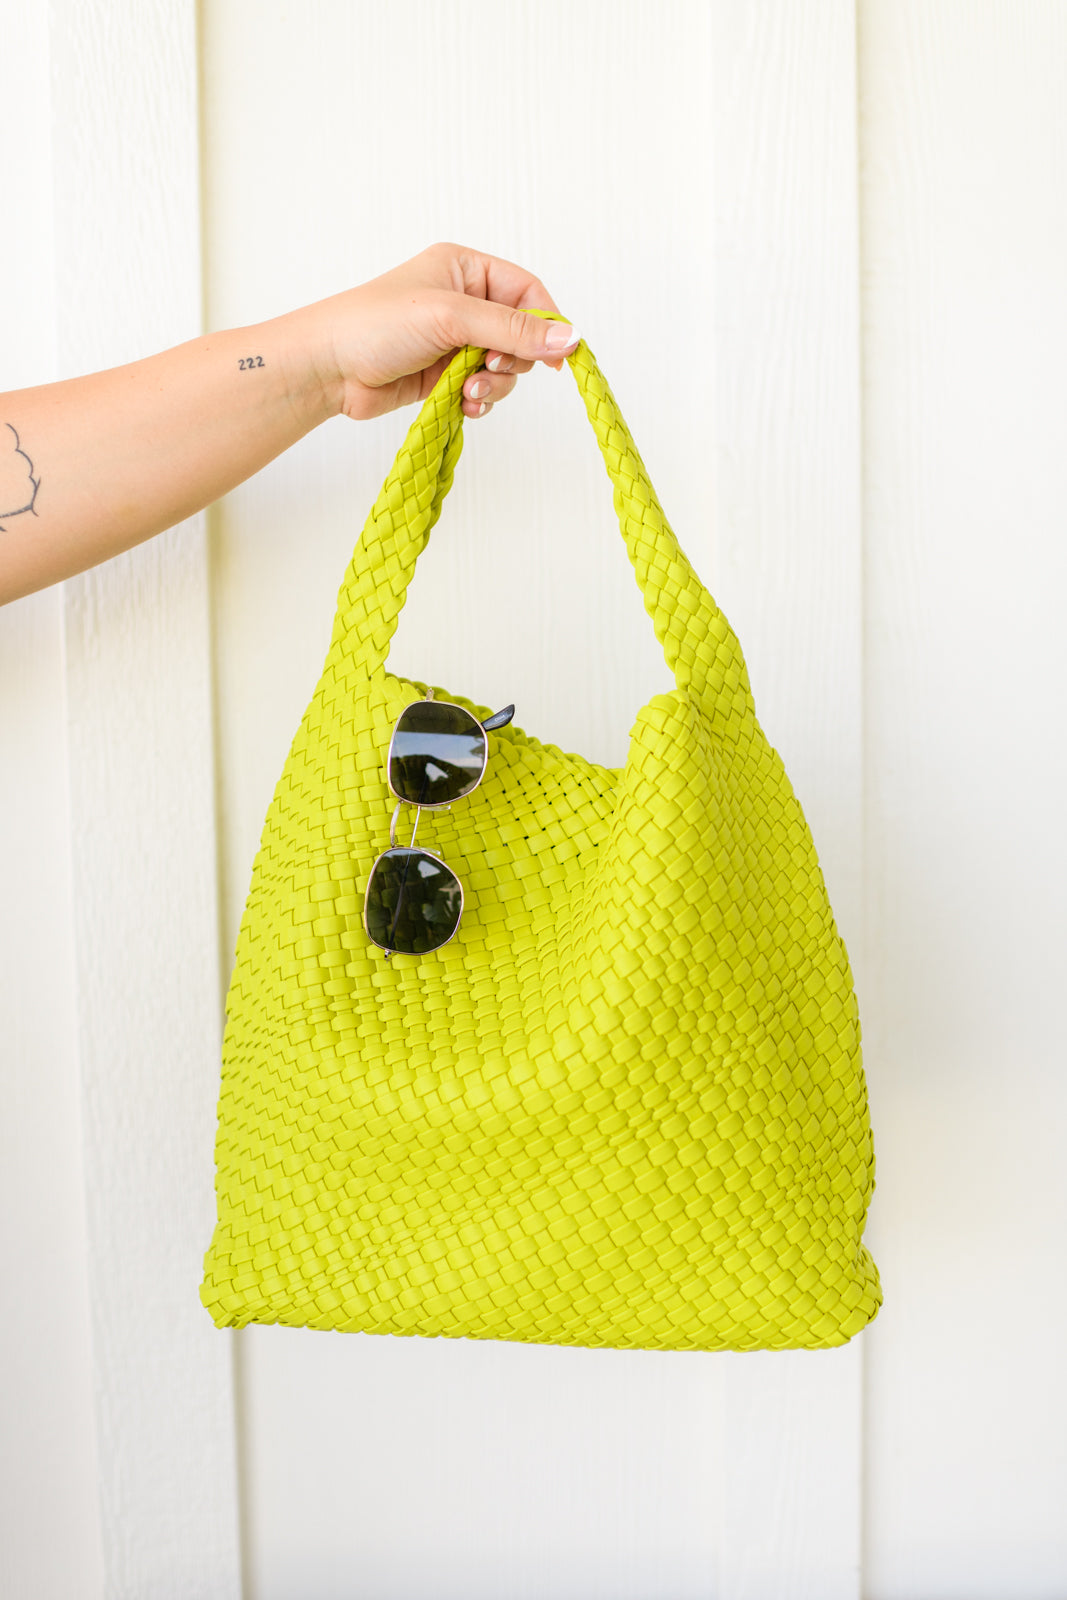 Woven and Worn Tote in Citron Ave Shops